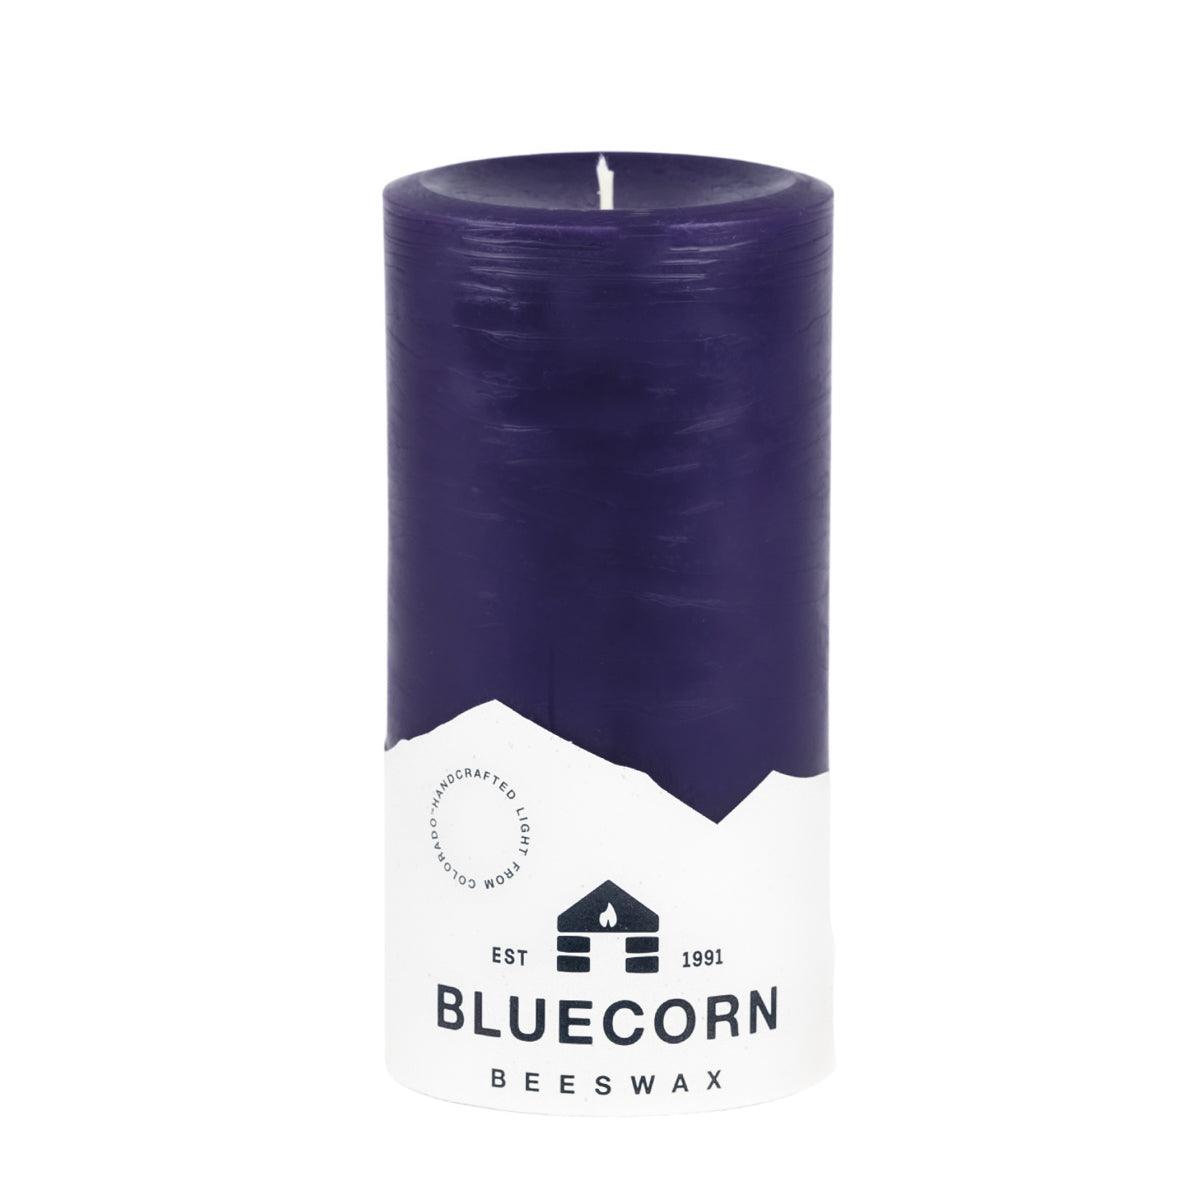 Bluecorn Beeswax 100% Pure Beeswax 3" x 6" Colored Pillar Candle. Burn Time: 90 hours. Made with 100% Pure Beeswax, wax is Eggplant in color. Made with 100% pure cotton wick, no lead and paraffin free. Clean burning and non-toxic. Features Bluecorn Beeswax label printed on 100% recycled paper. Clearance items might have an odd blemish or air bubble, but will still burn beautifully.